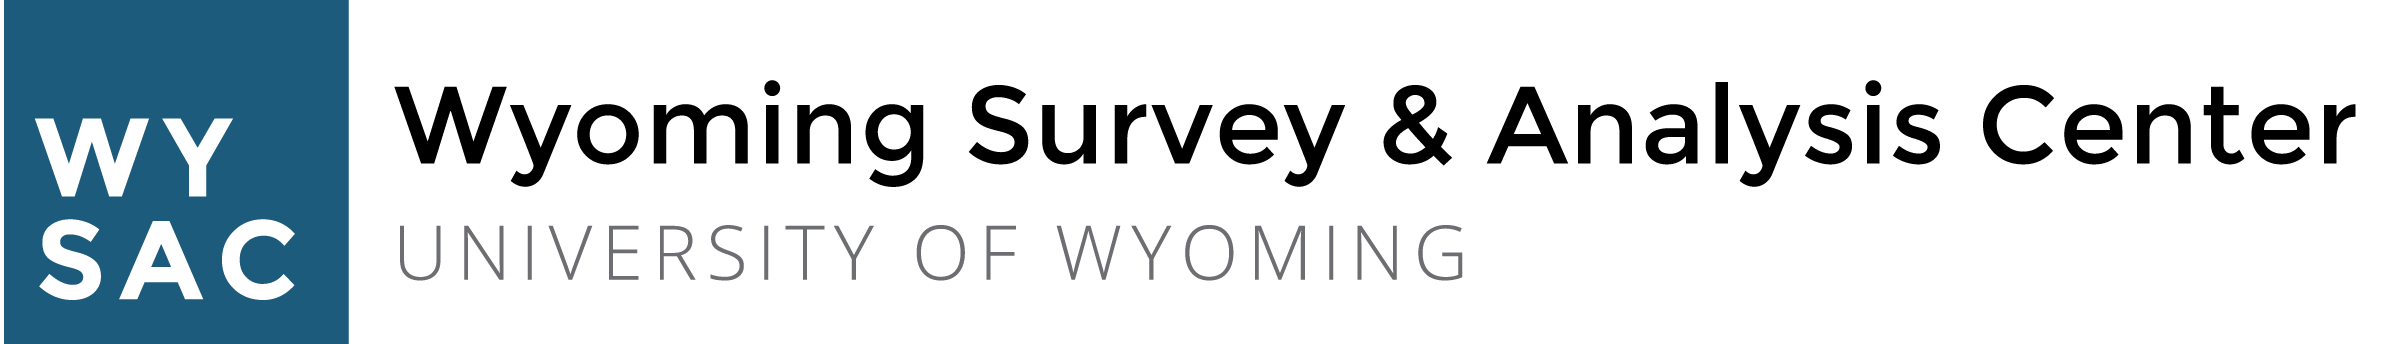 Logo for the Wyoming Survey & Analysis Center at the University of Wyoming